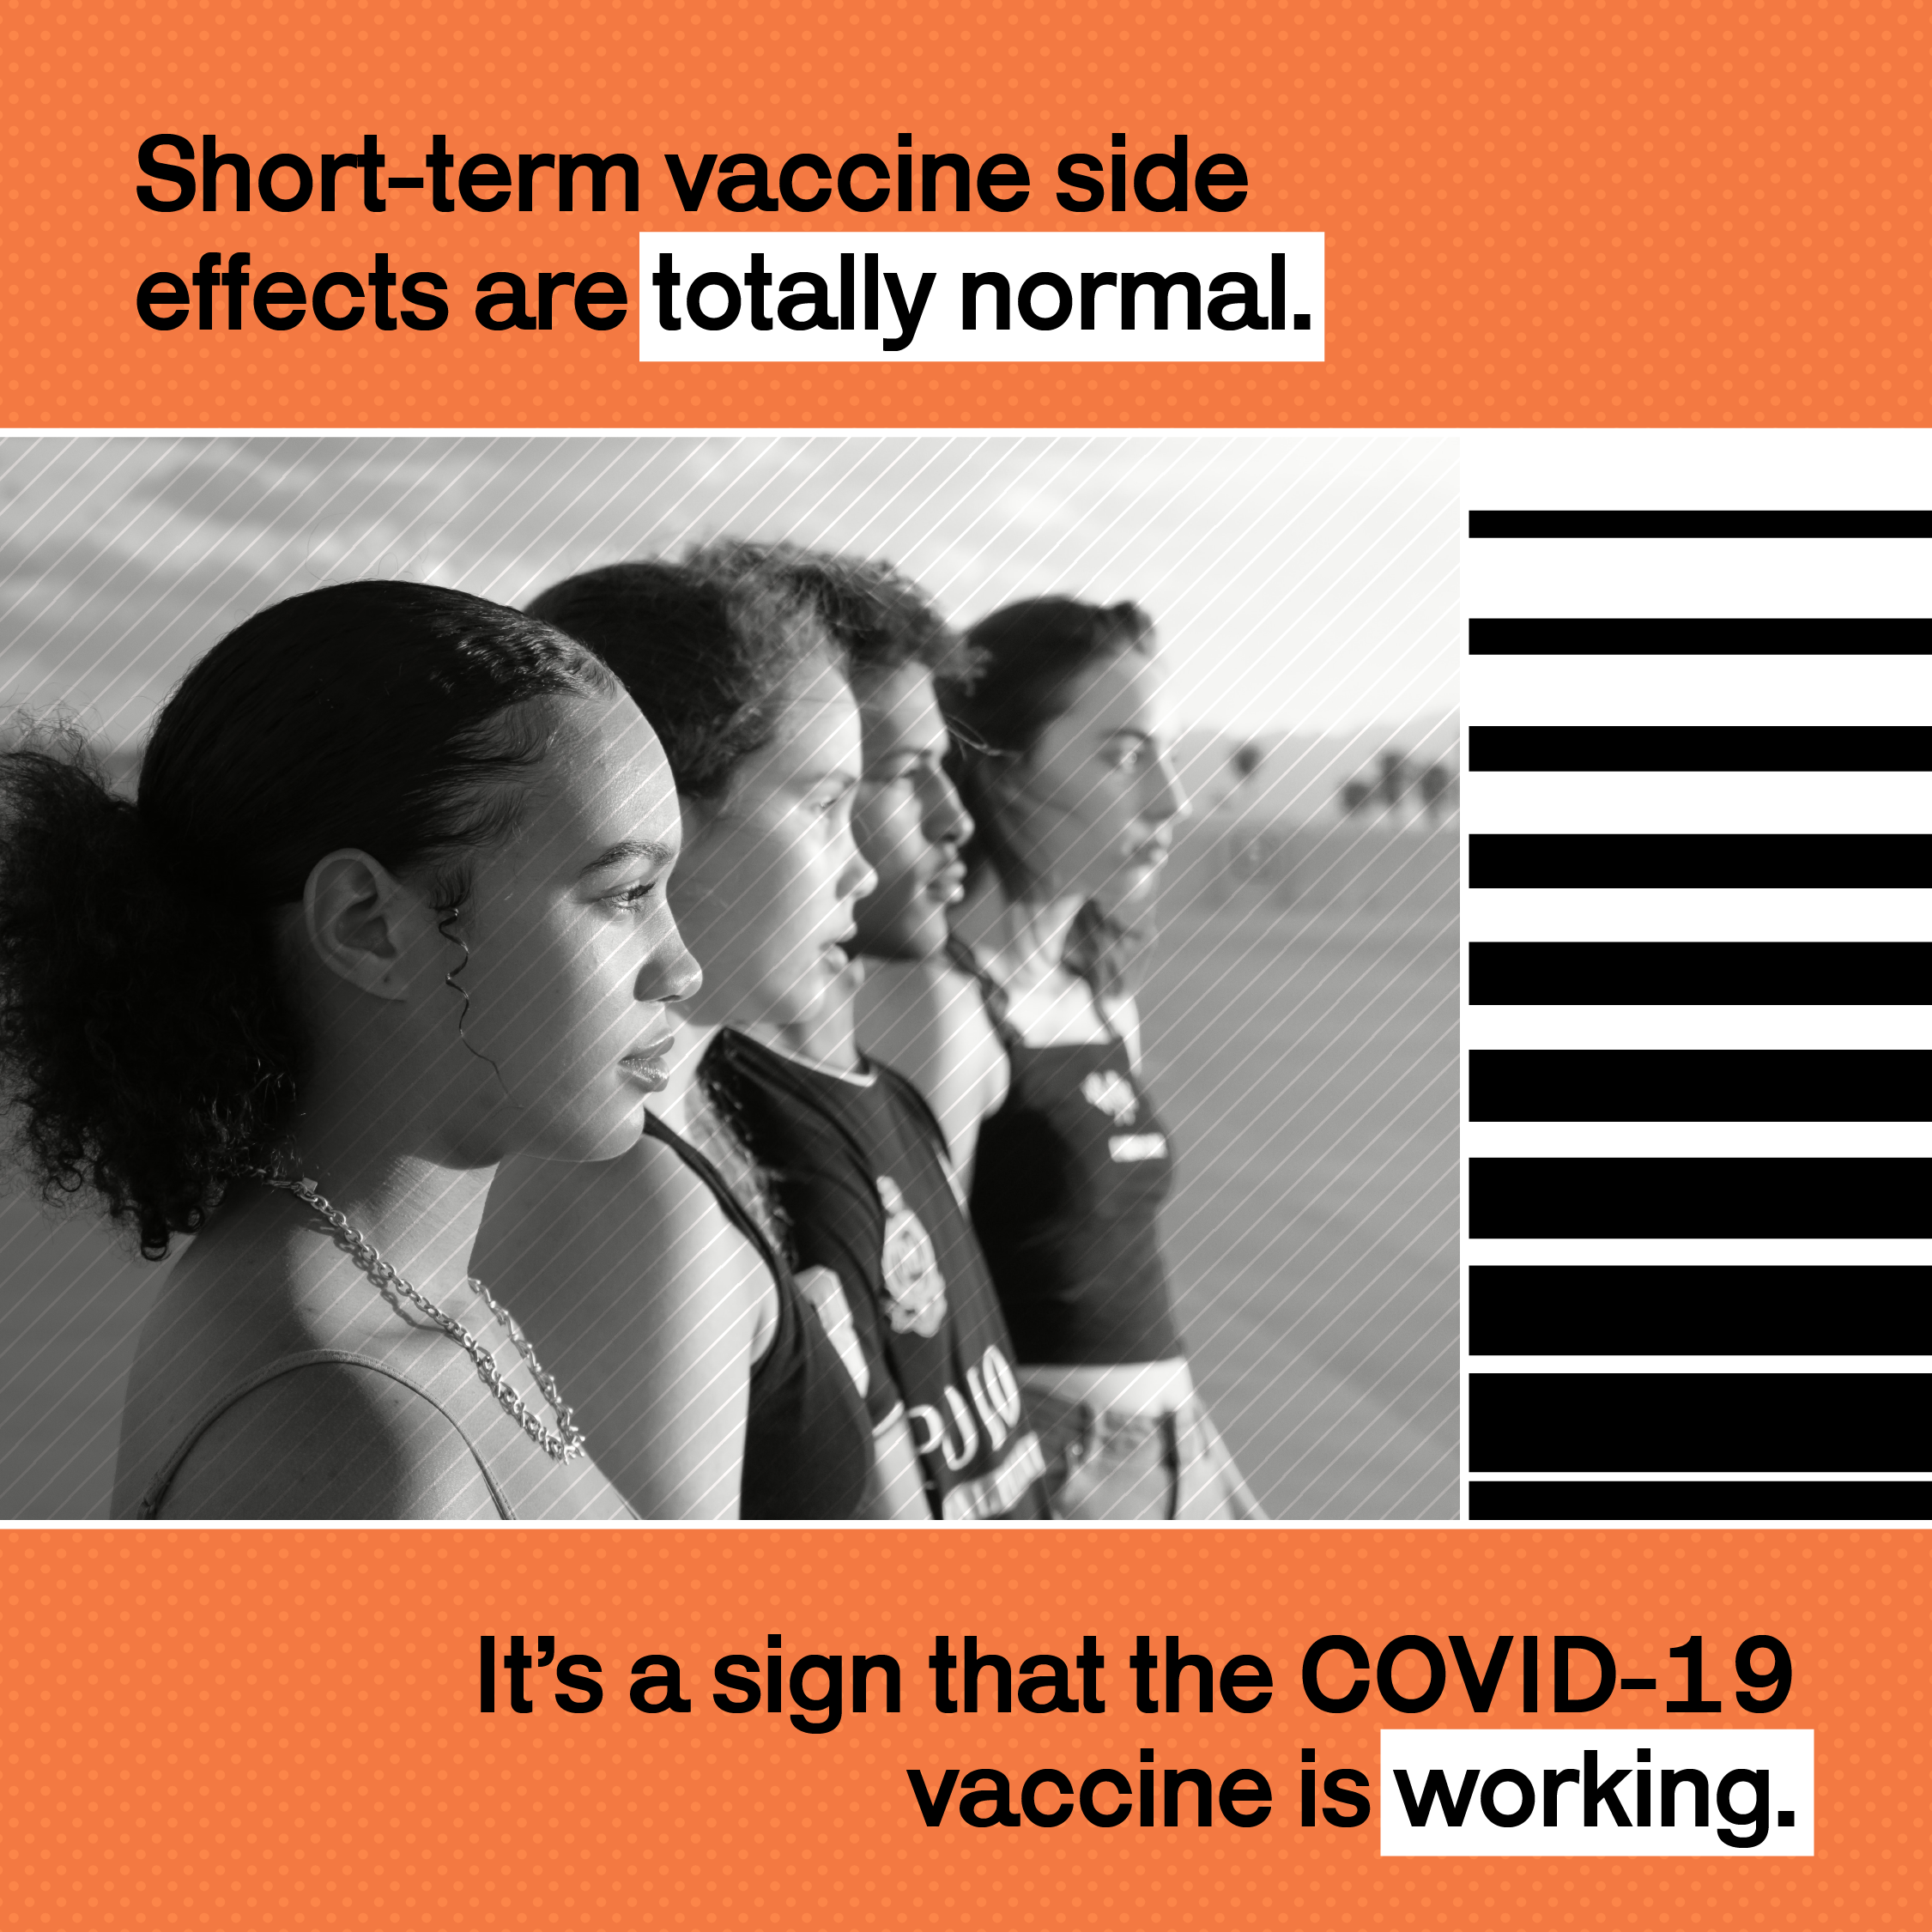 Black and white image of four teenagers standing in a diagonal line on a field and facing the field like they are ready to race. Graphic text is black font on orange blocks framing the image and says "Short-term vaccine side effects are totally normal.  It's a sign the vaccine is working."